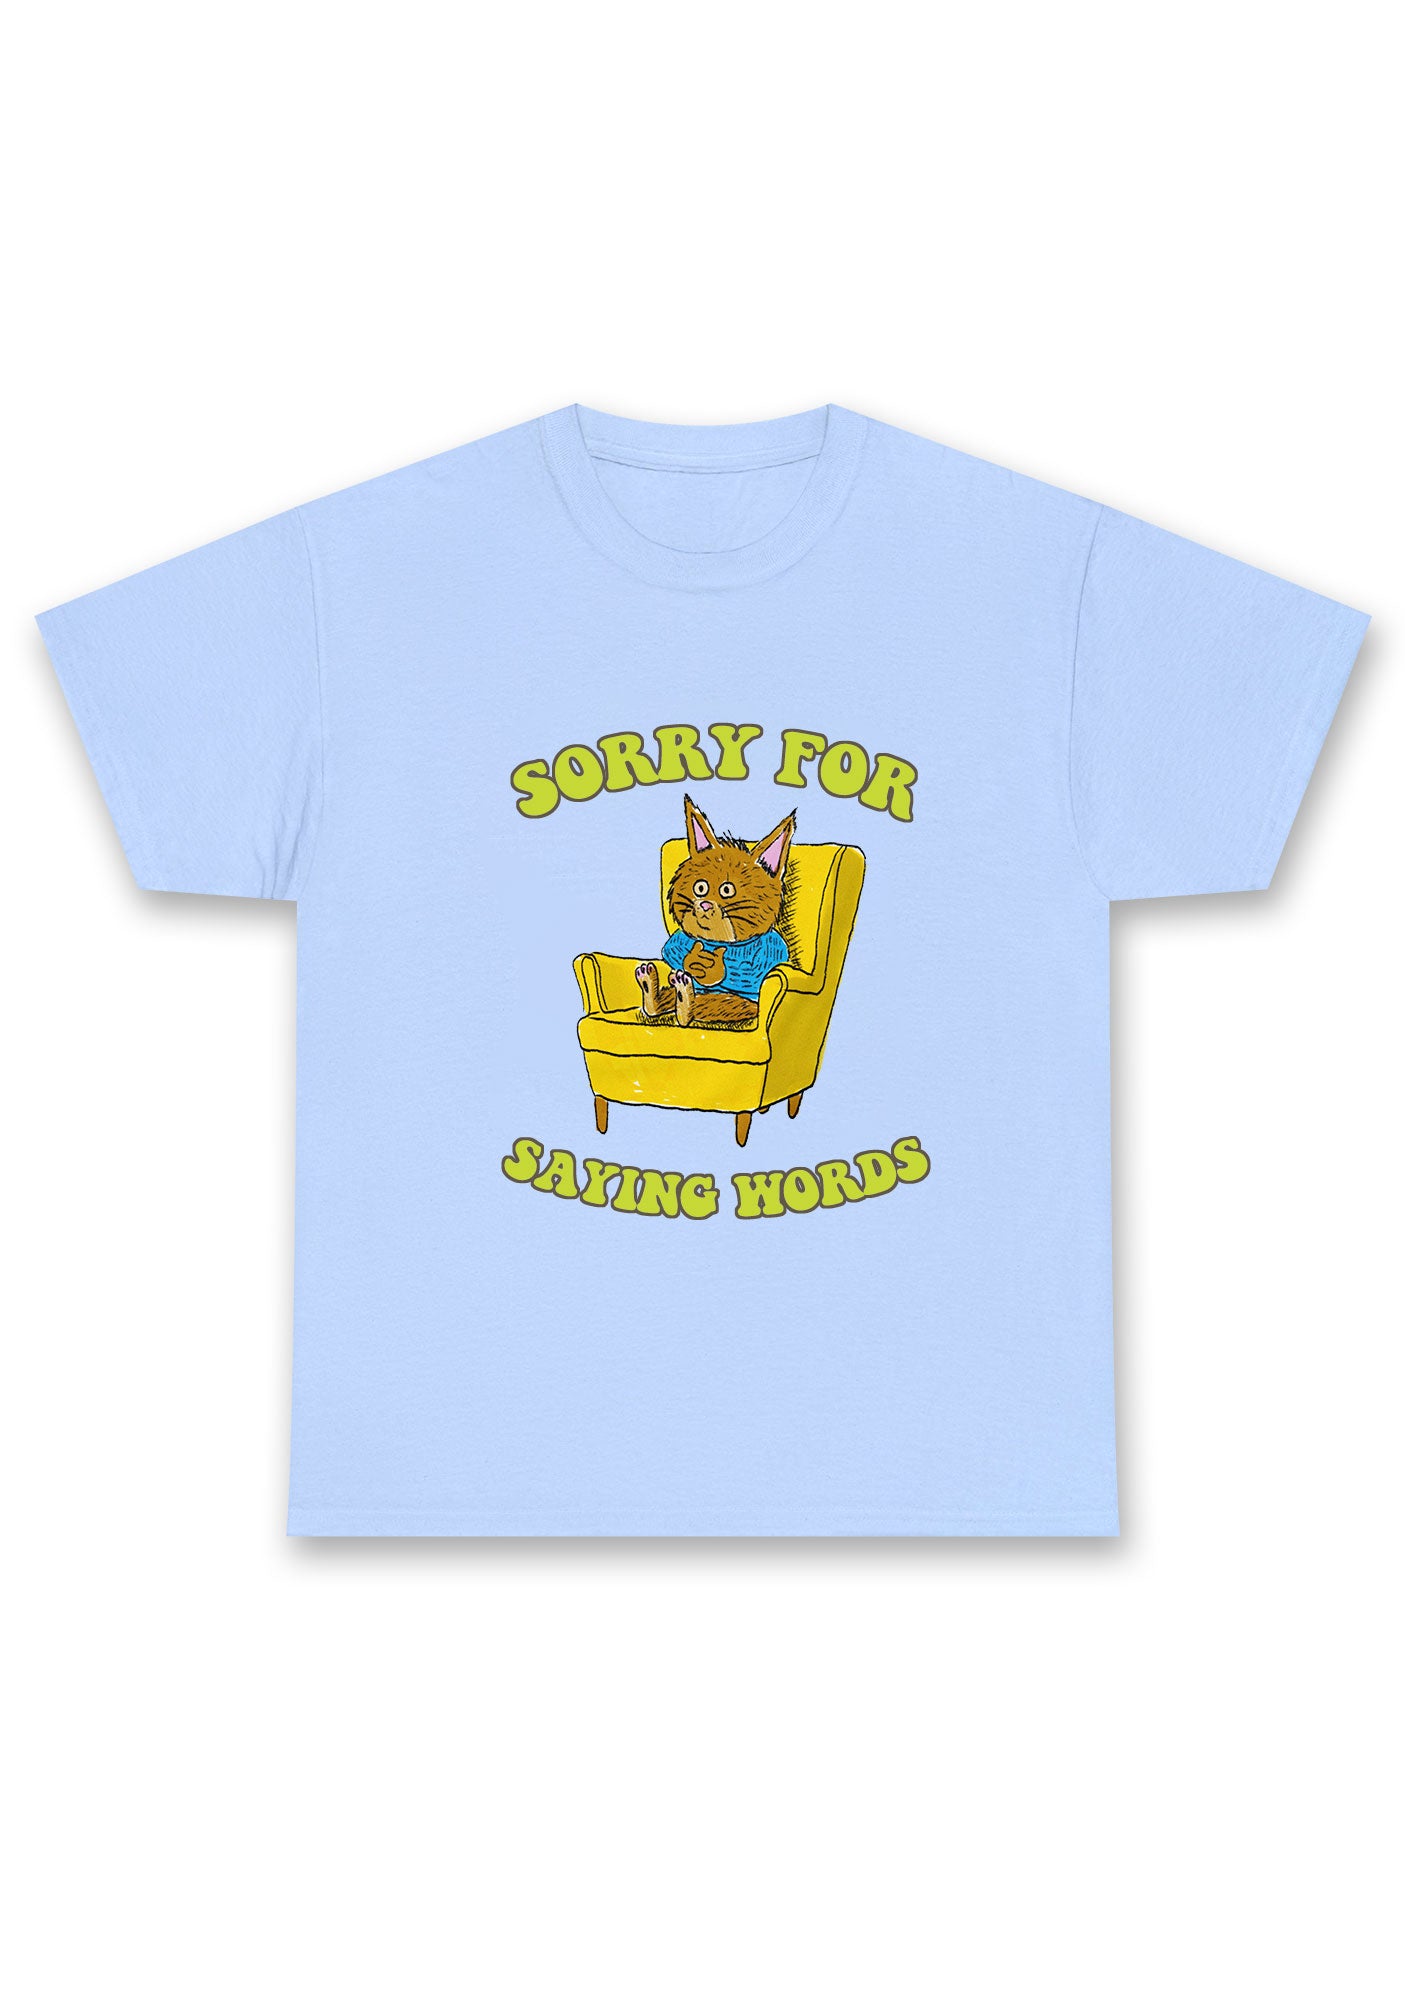 Sorry For Saying Words Chunky Shirt